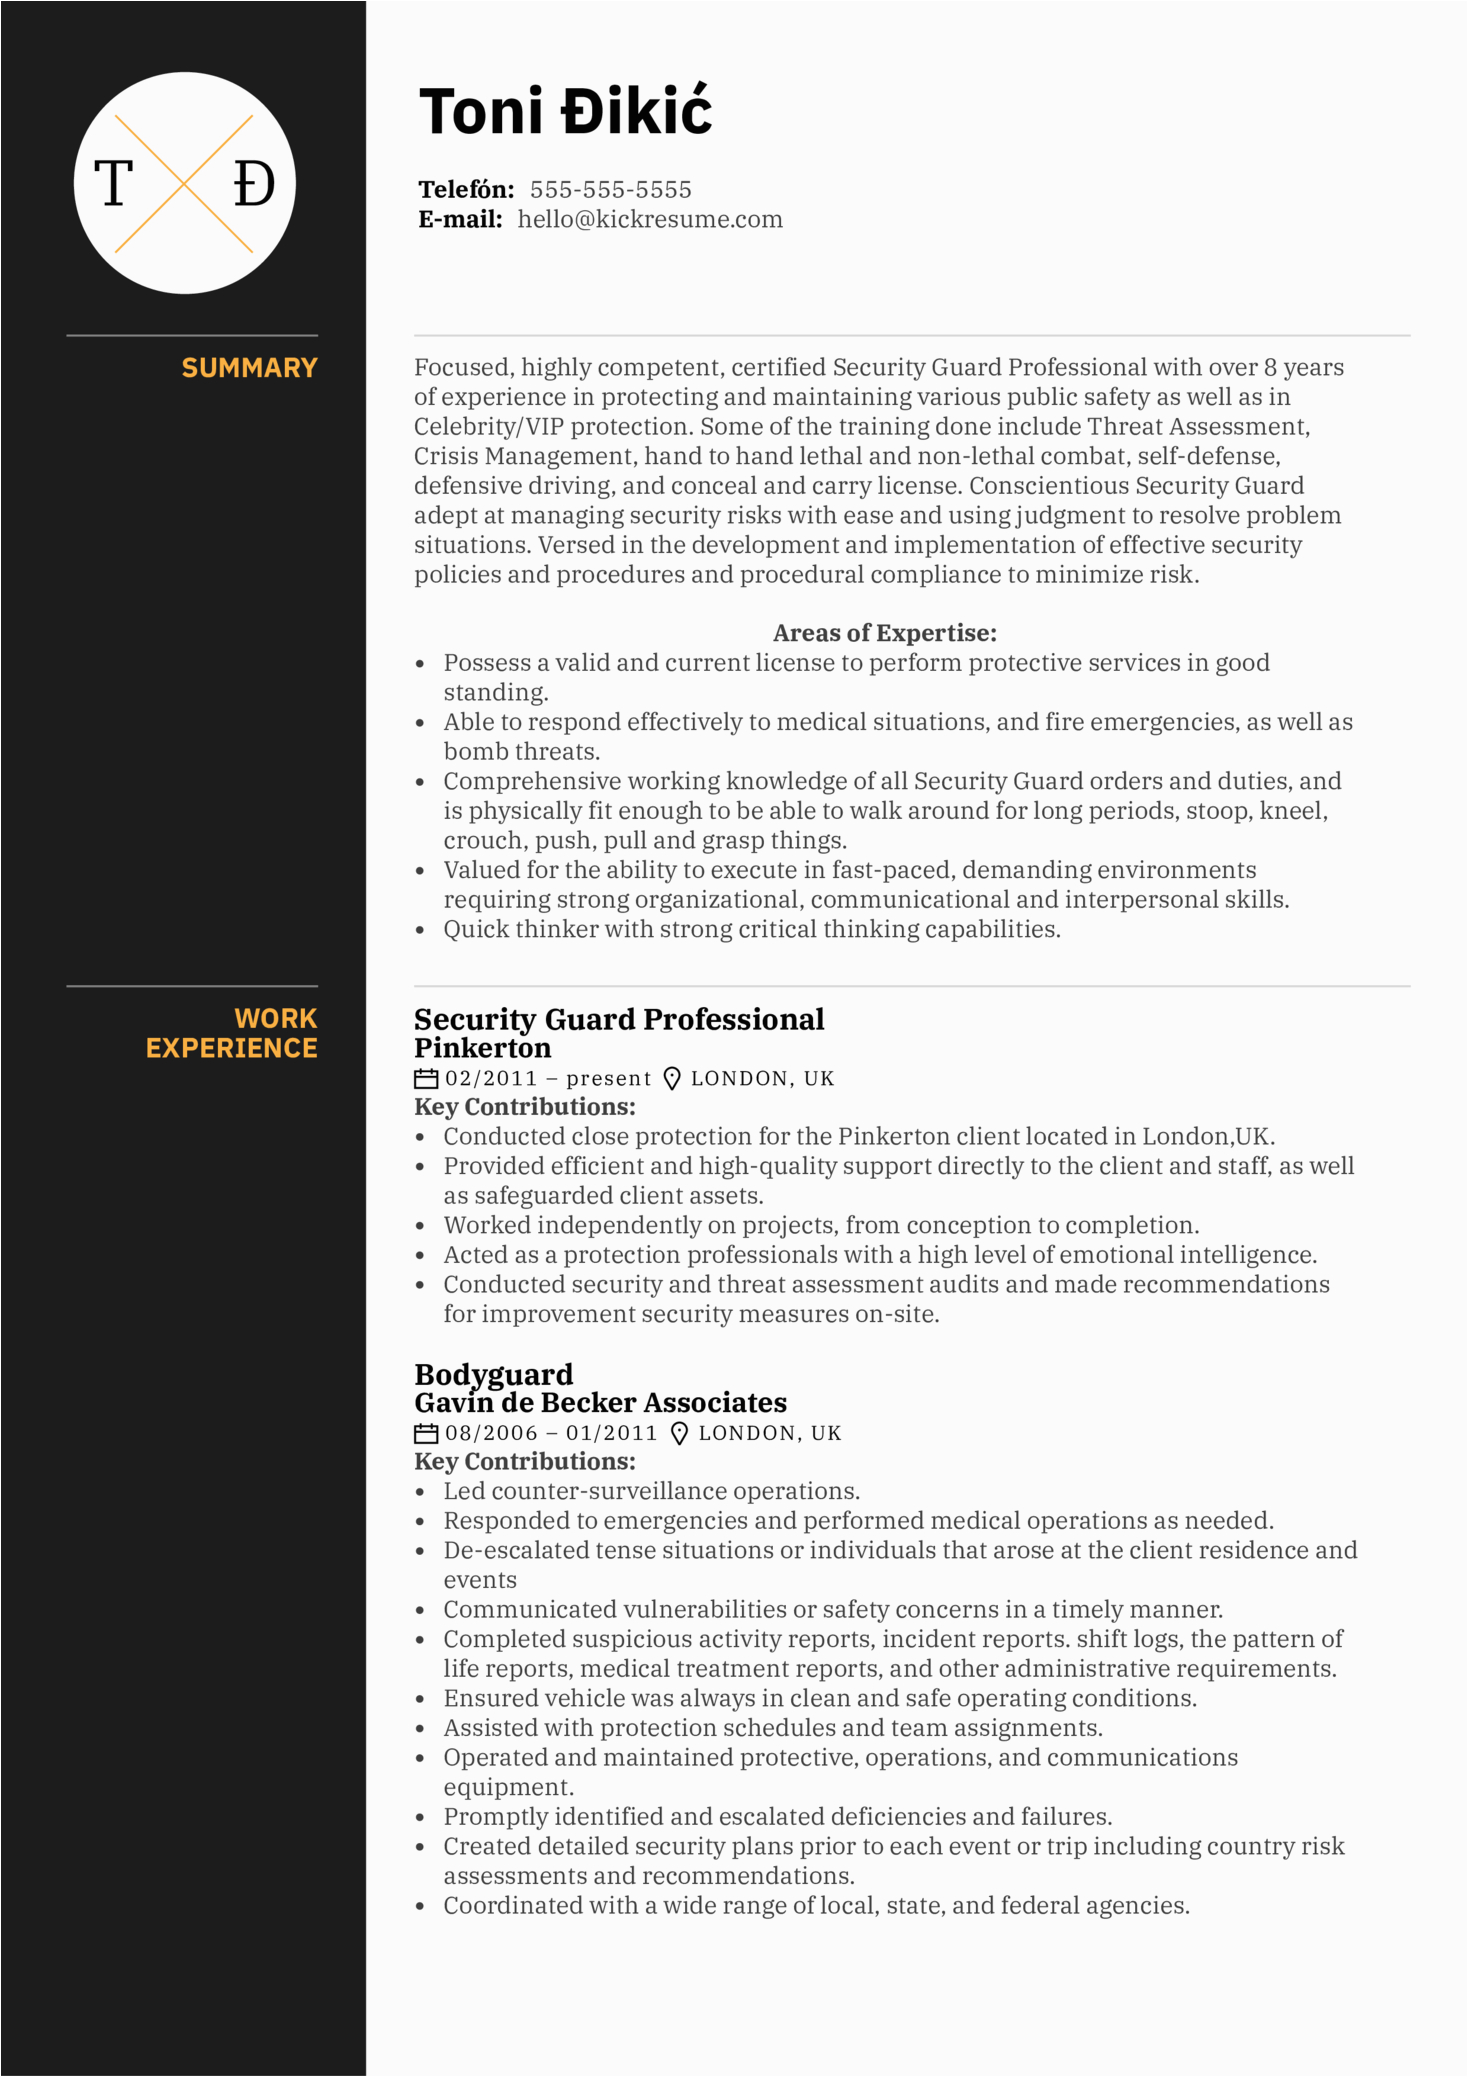 Security Guard Resume Examples and Samples Security Guard Professional Resume Sample